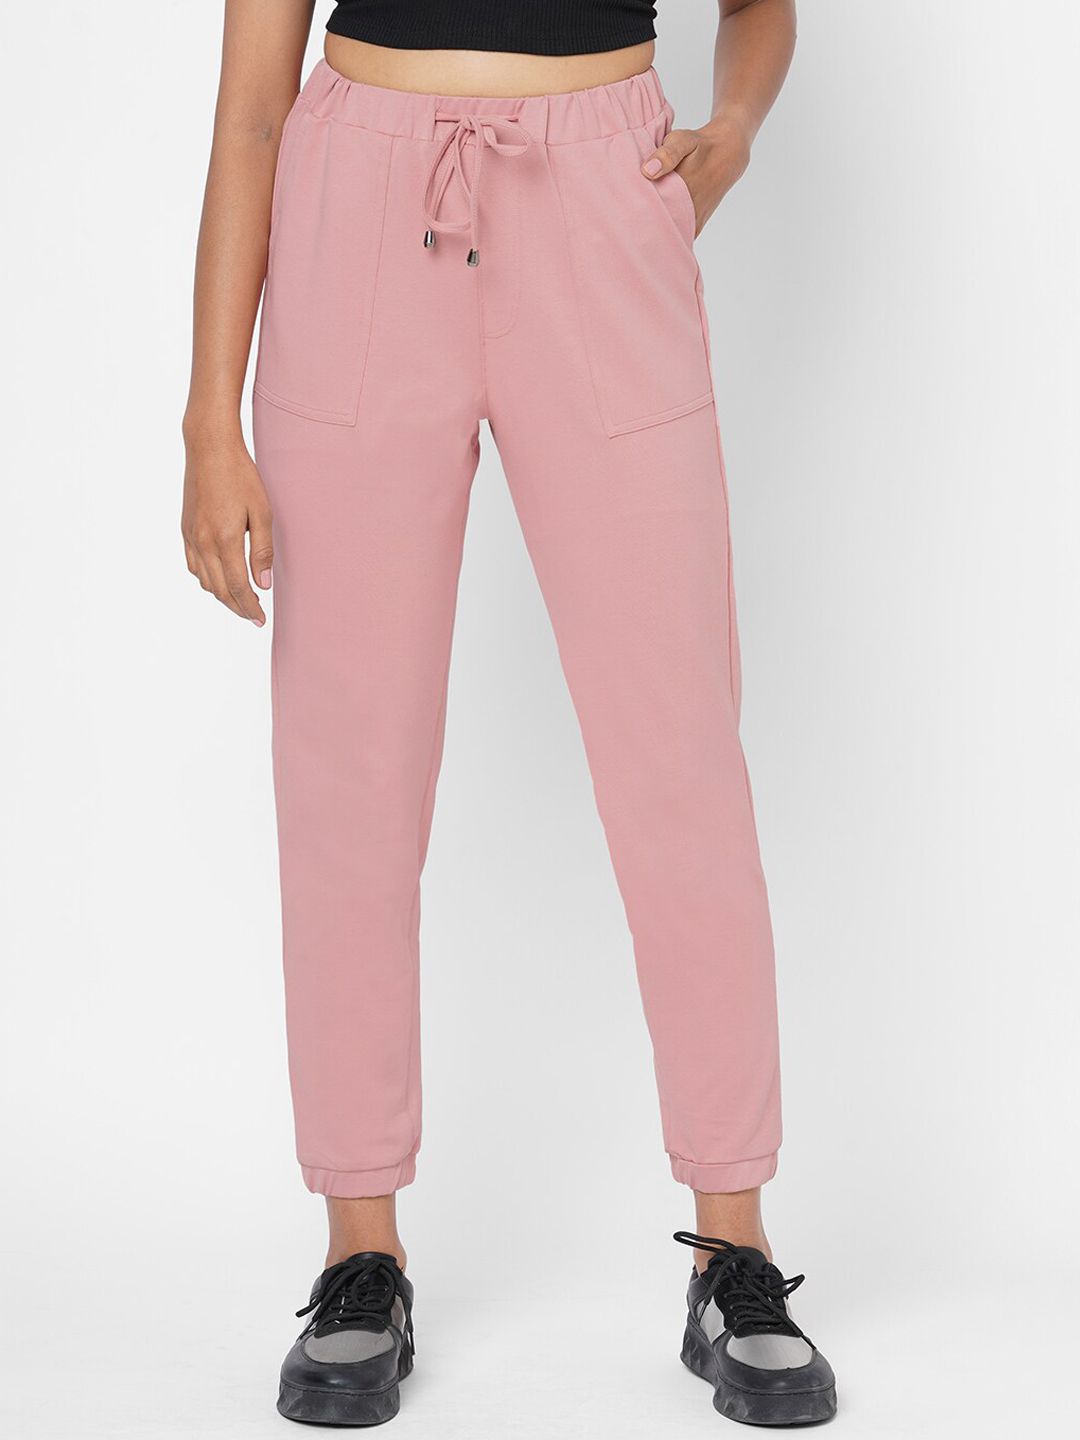 Kraus Jeans Women Pink Skinny Fit High-Rise Joggers Price in India